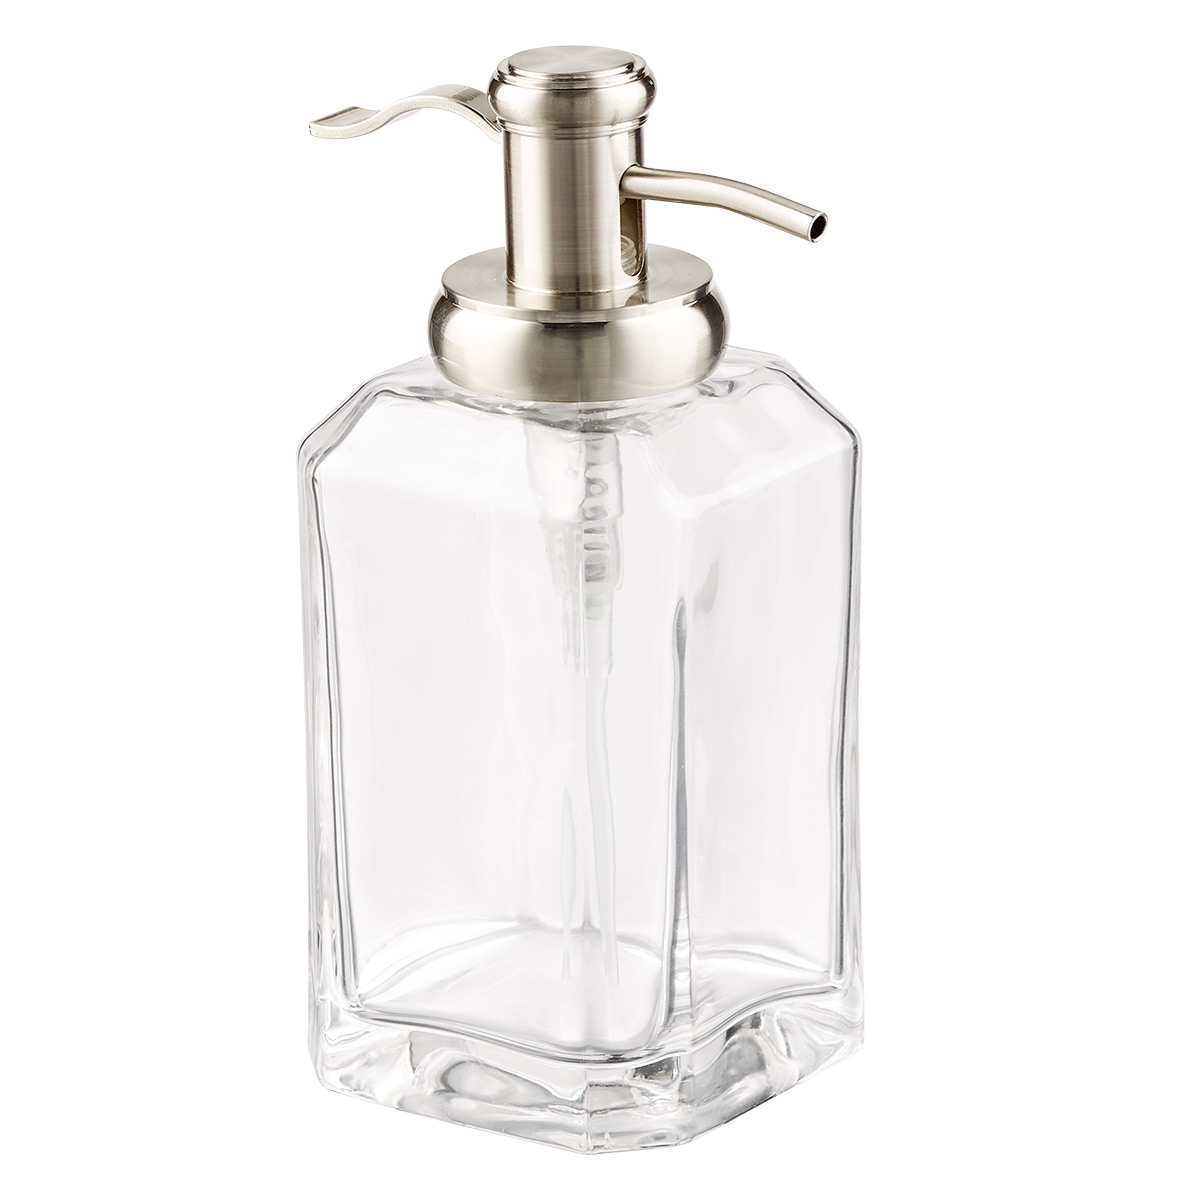 11.5 oz. Clear Glass Soap Dispenser | The Container Store